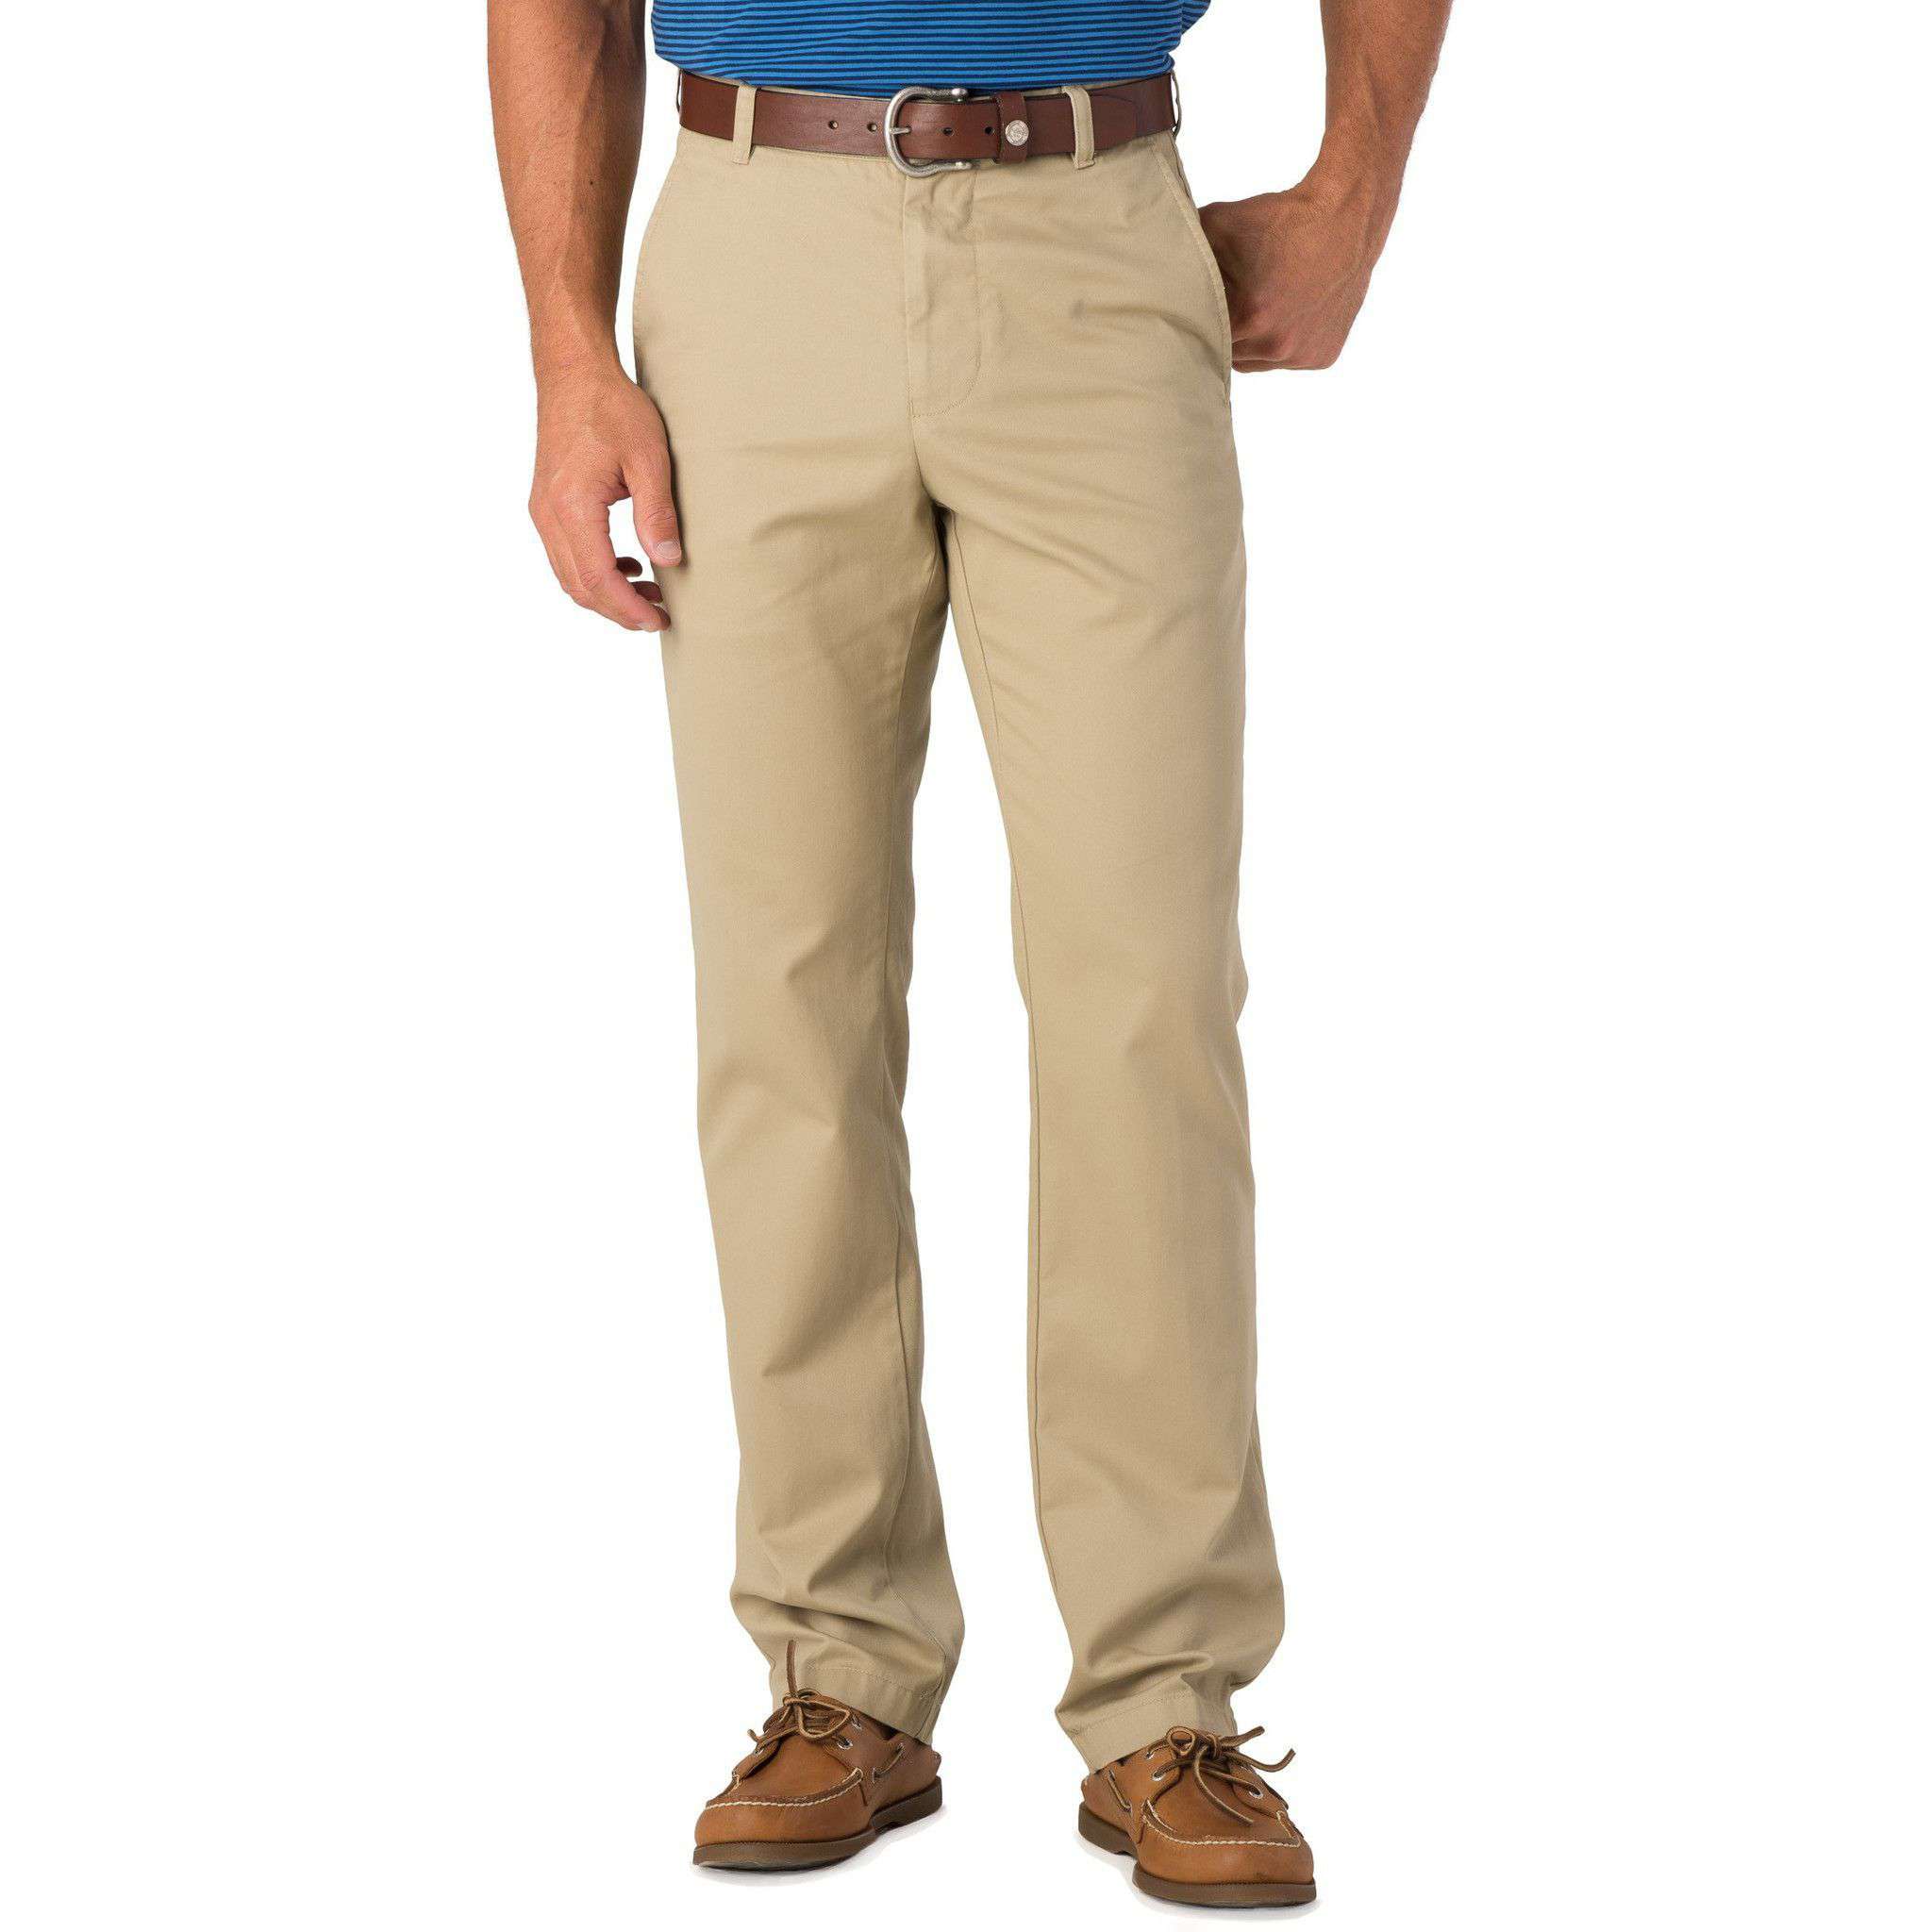 Men's Business Casual Pants - Navy Slim Fit Chino Pants – Southern Tide